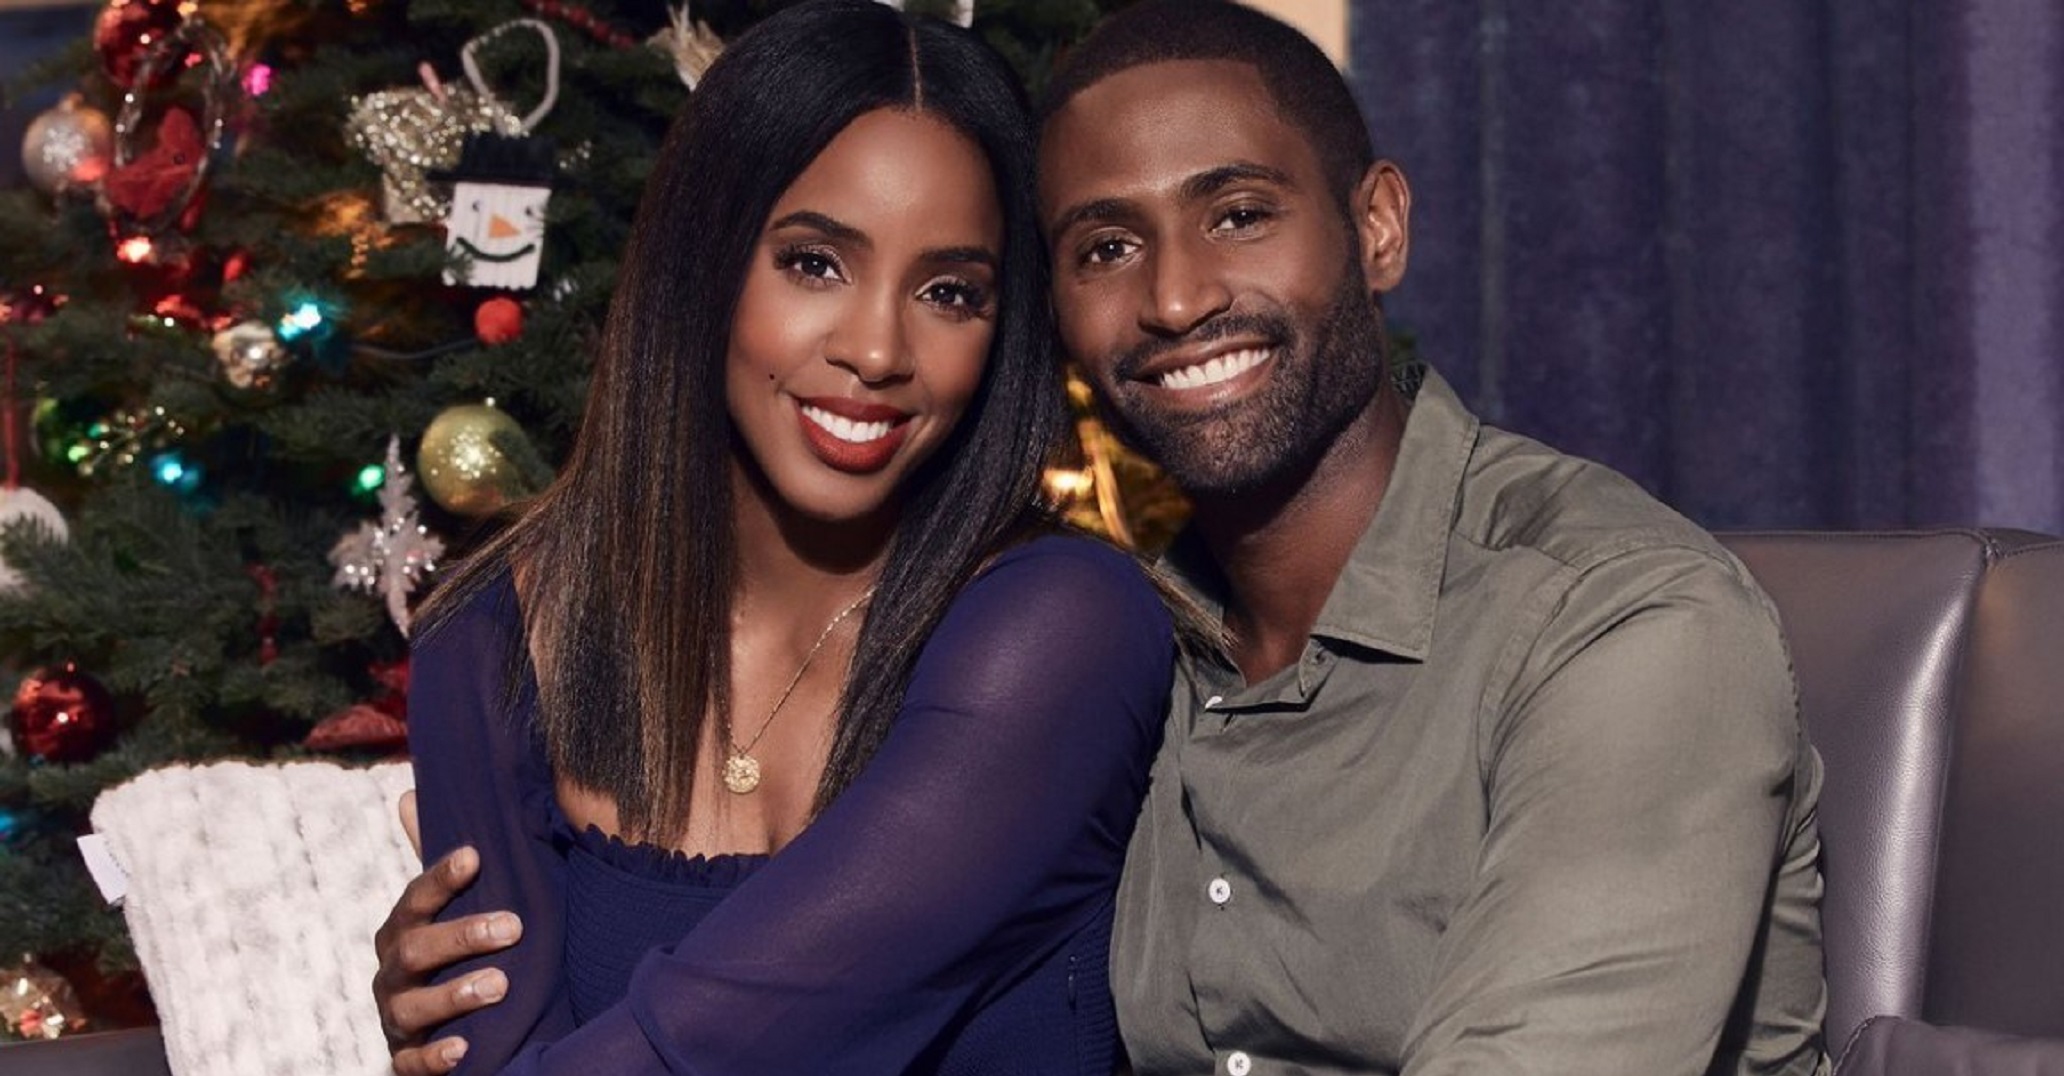 Movie Trailer: Kelly Rowland Stars in Holiday Film – ‘Merry Liddle Christmas’